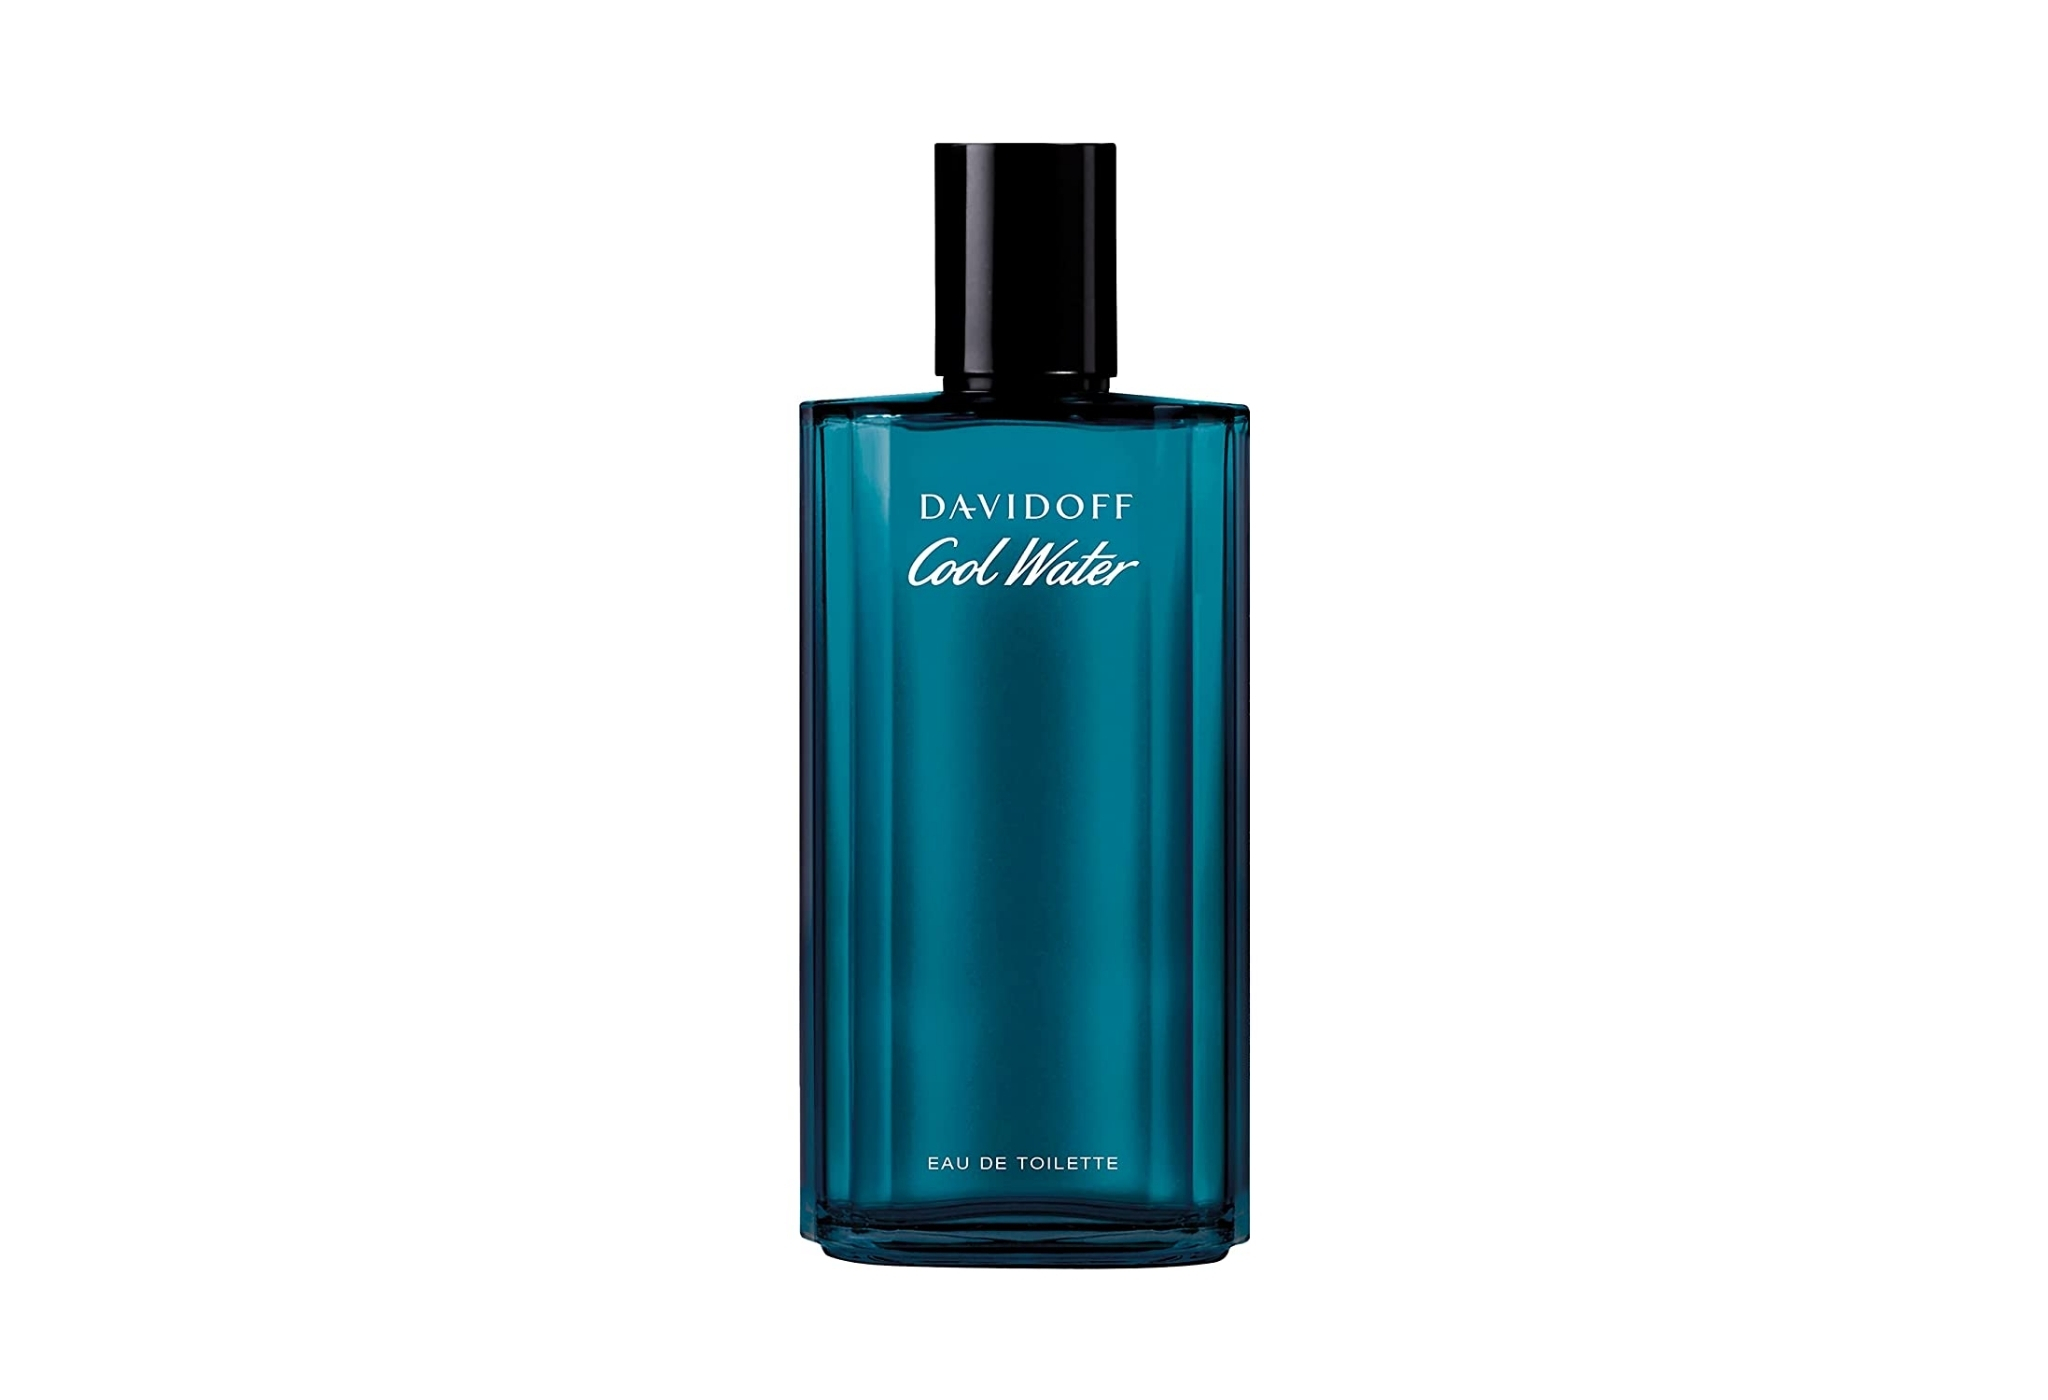 Davidoff Cool Water - most complimented men's colognes